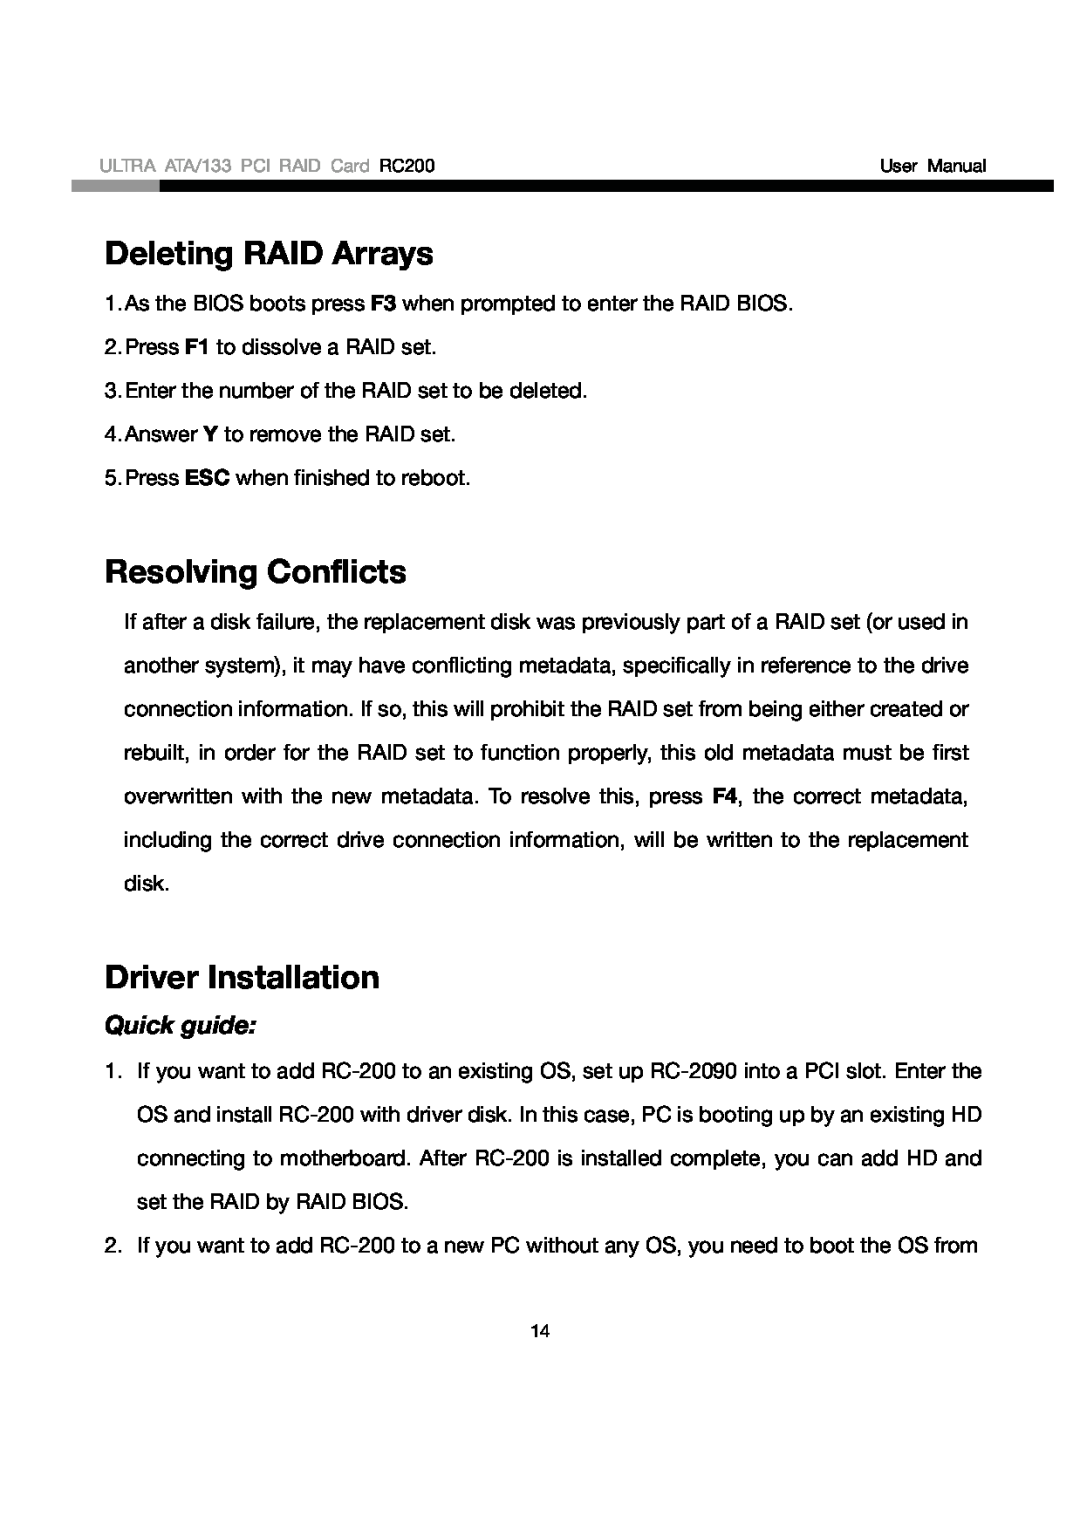 Rosewill RC200 user manual Deleting RAID Arrays, Resolving Conflicts, Driver Installation, Quick guide 